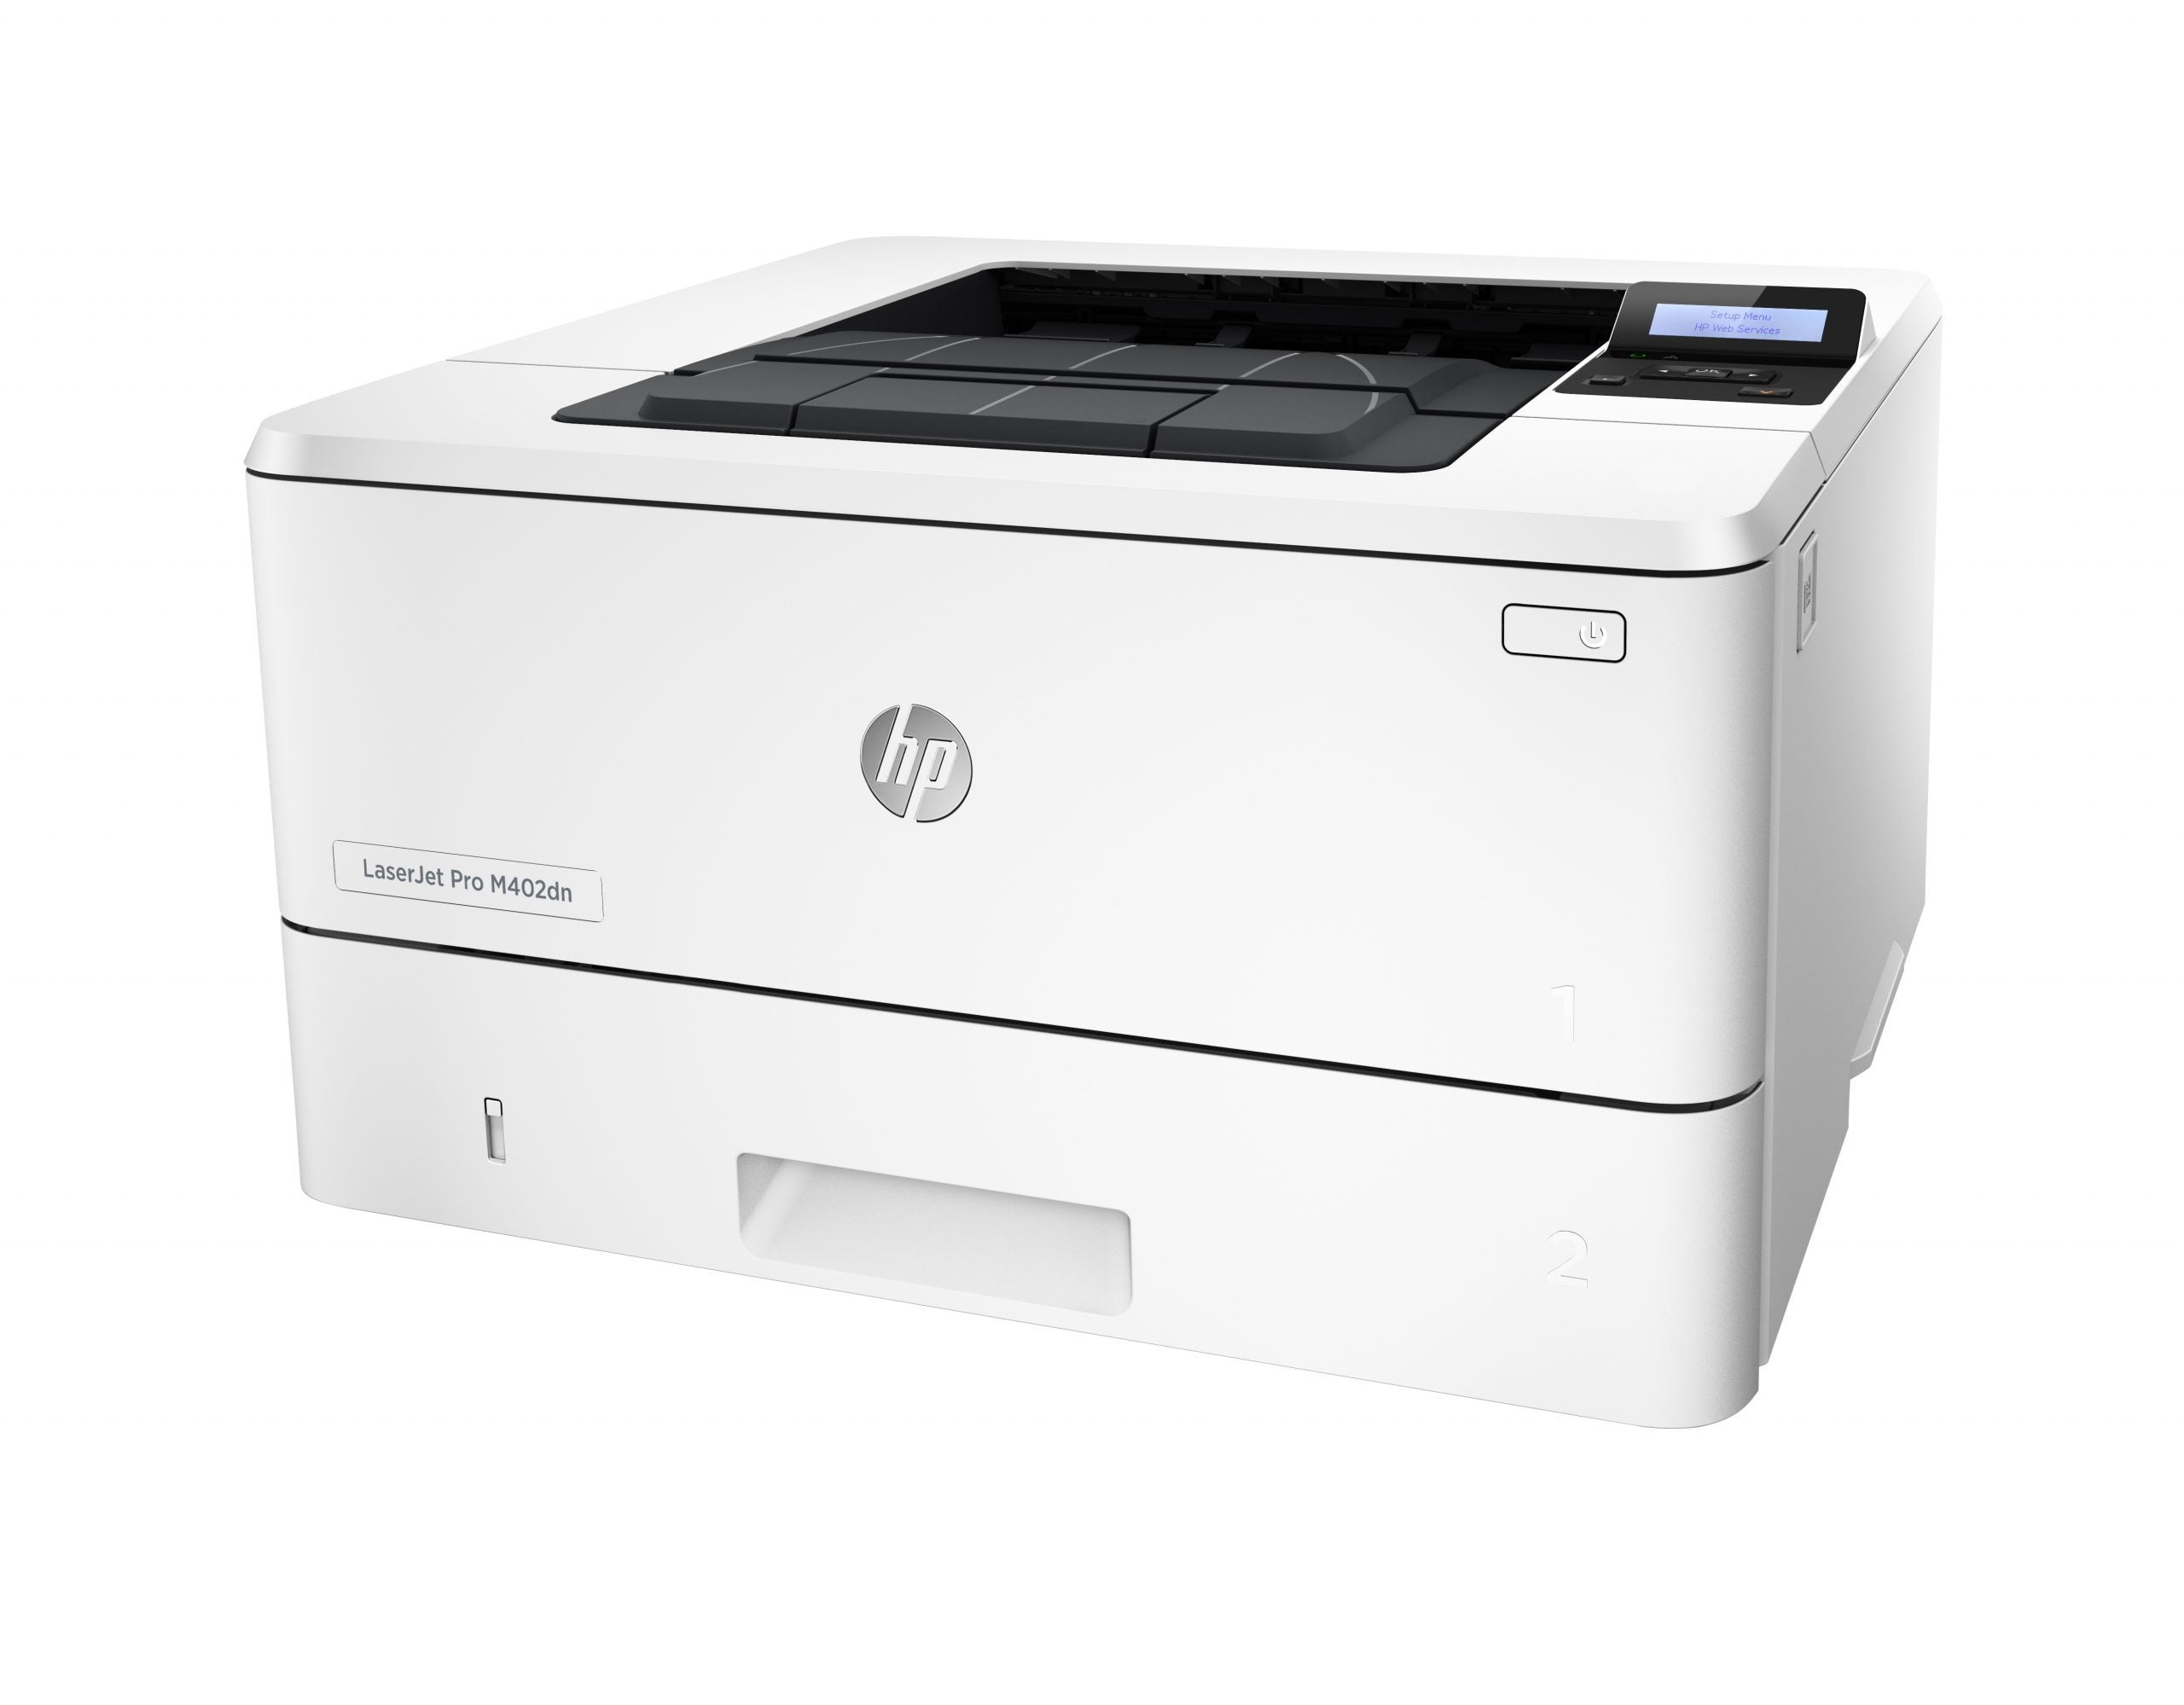 HP LaserJet Pro m402dn-c5f94a m402 A4 Monochrome B/W Printer WITH DUPLEX AND LAN 